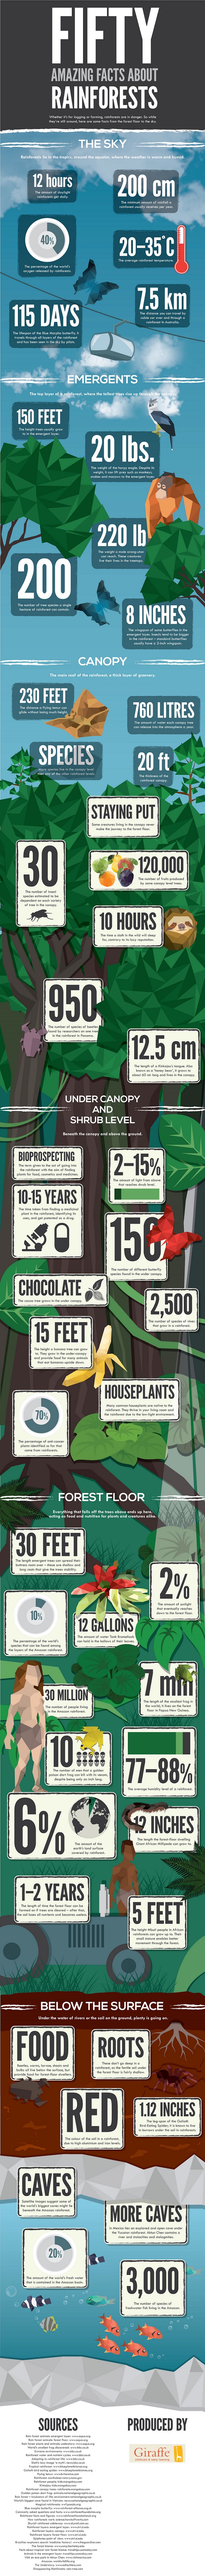 50 Amazing Facts About Rainforests [Infographic]